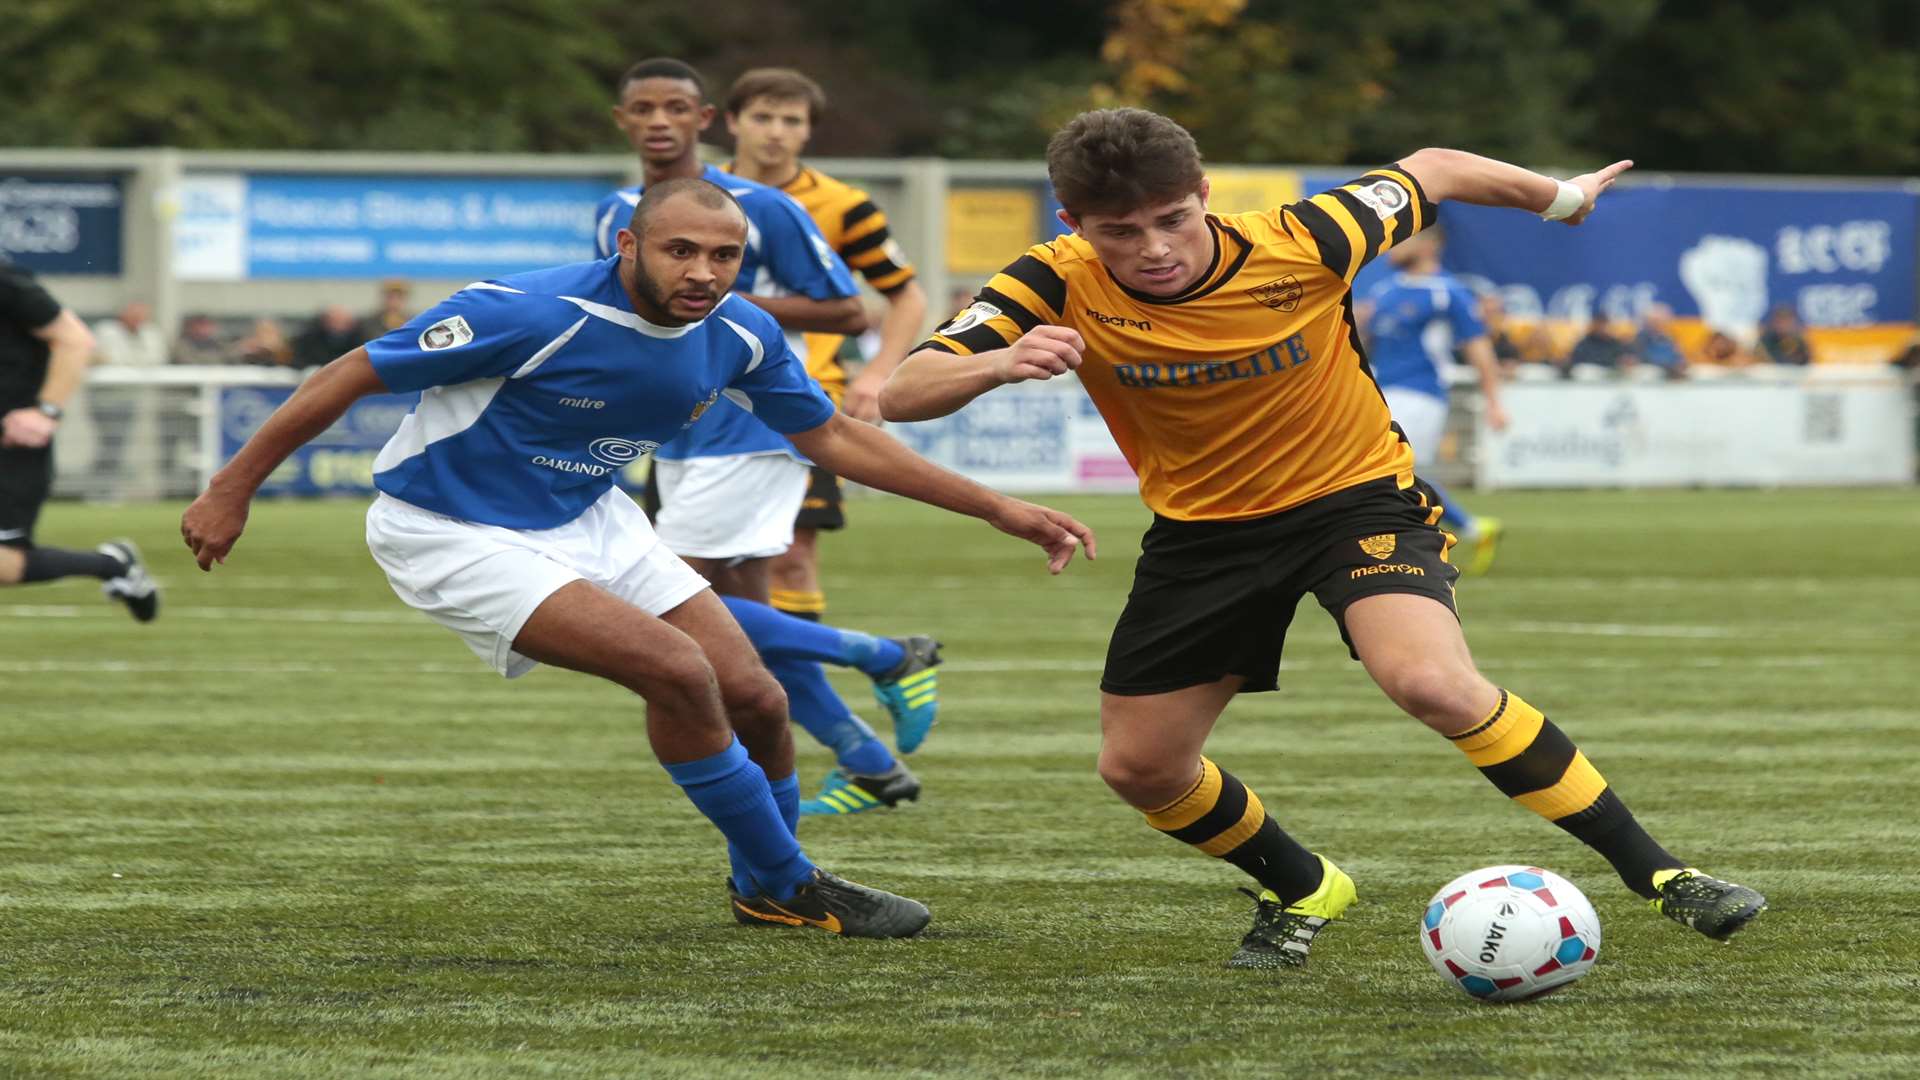 Jack Paxman in action for Maidstone against St Albans Picture: Martin Apps